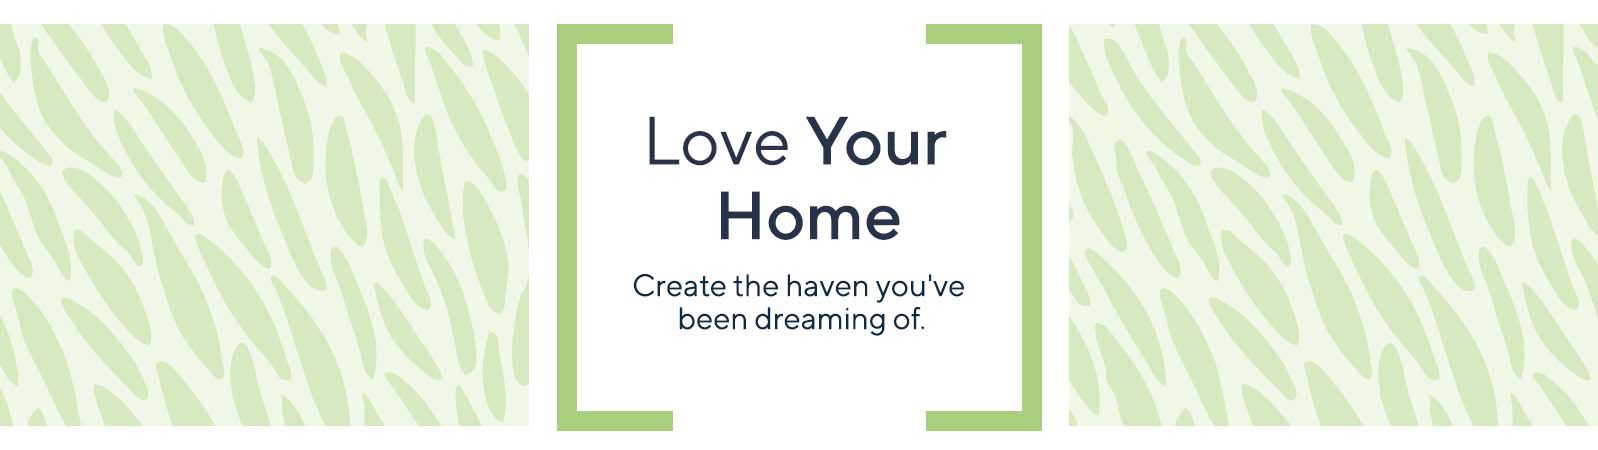 Love Your Home.  Create the haven you've been dreaming of.